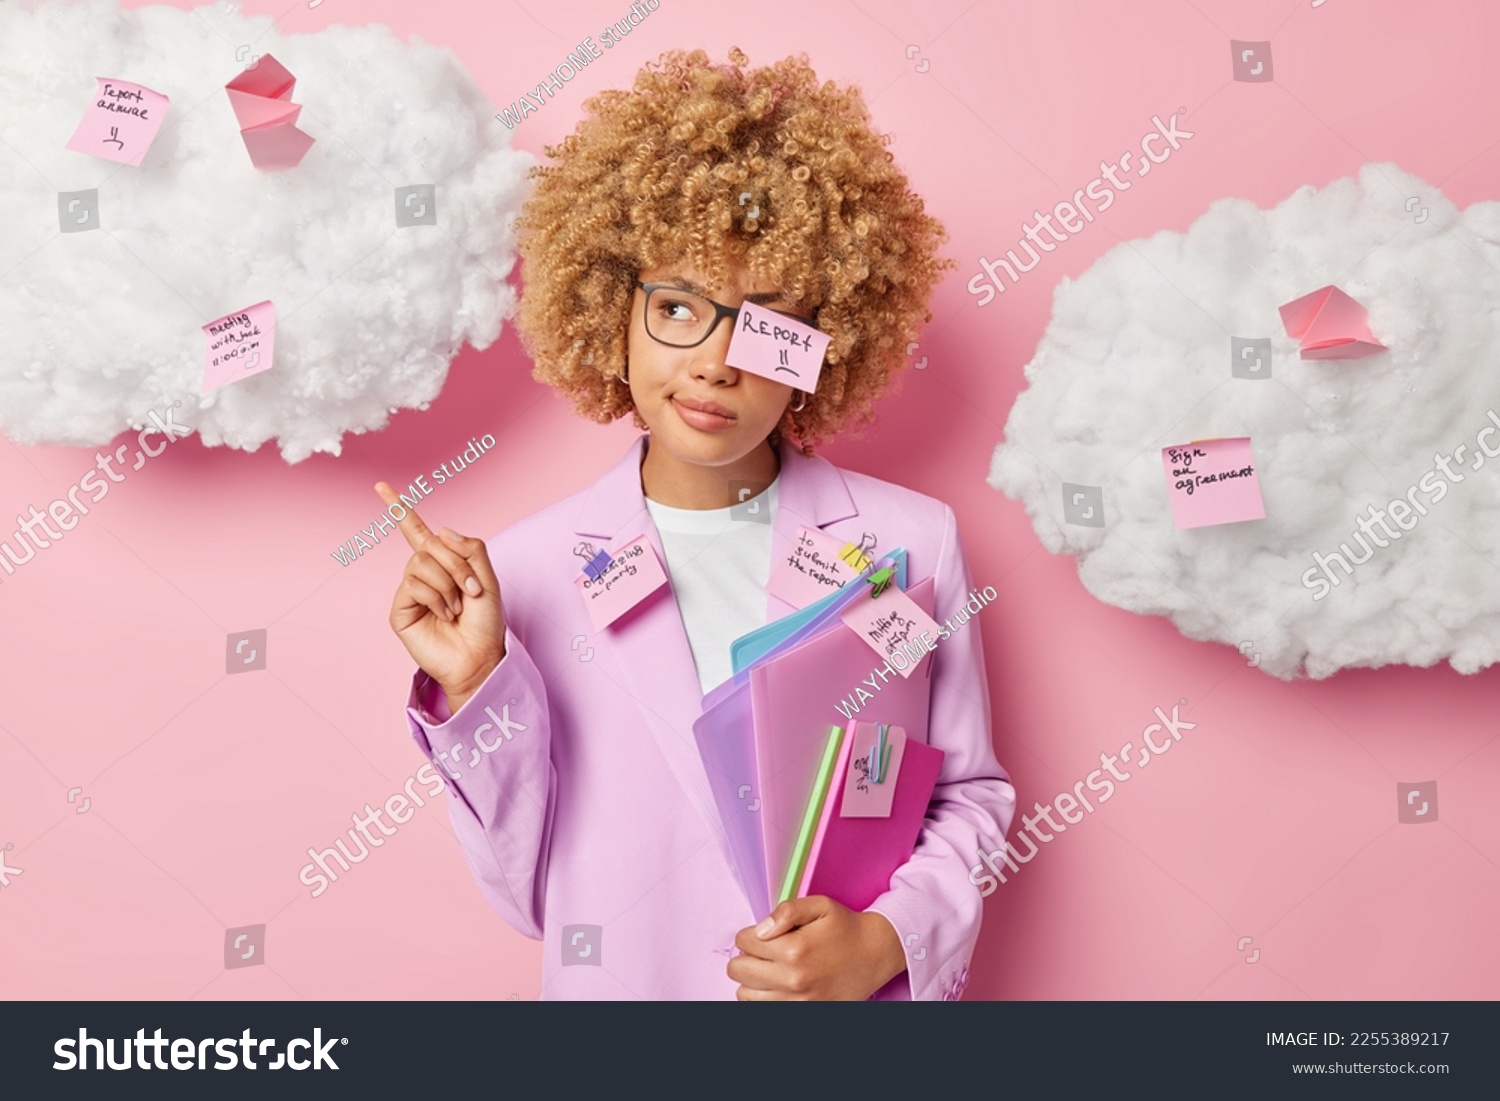 Serious female office worker coveres with memo stickers writes down list to do poses with folders indicates index finger overhead dressed in formal clothes isolated over pink background clouds above #2255389217